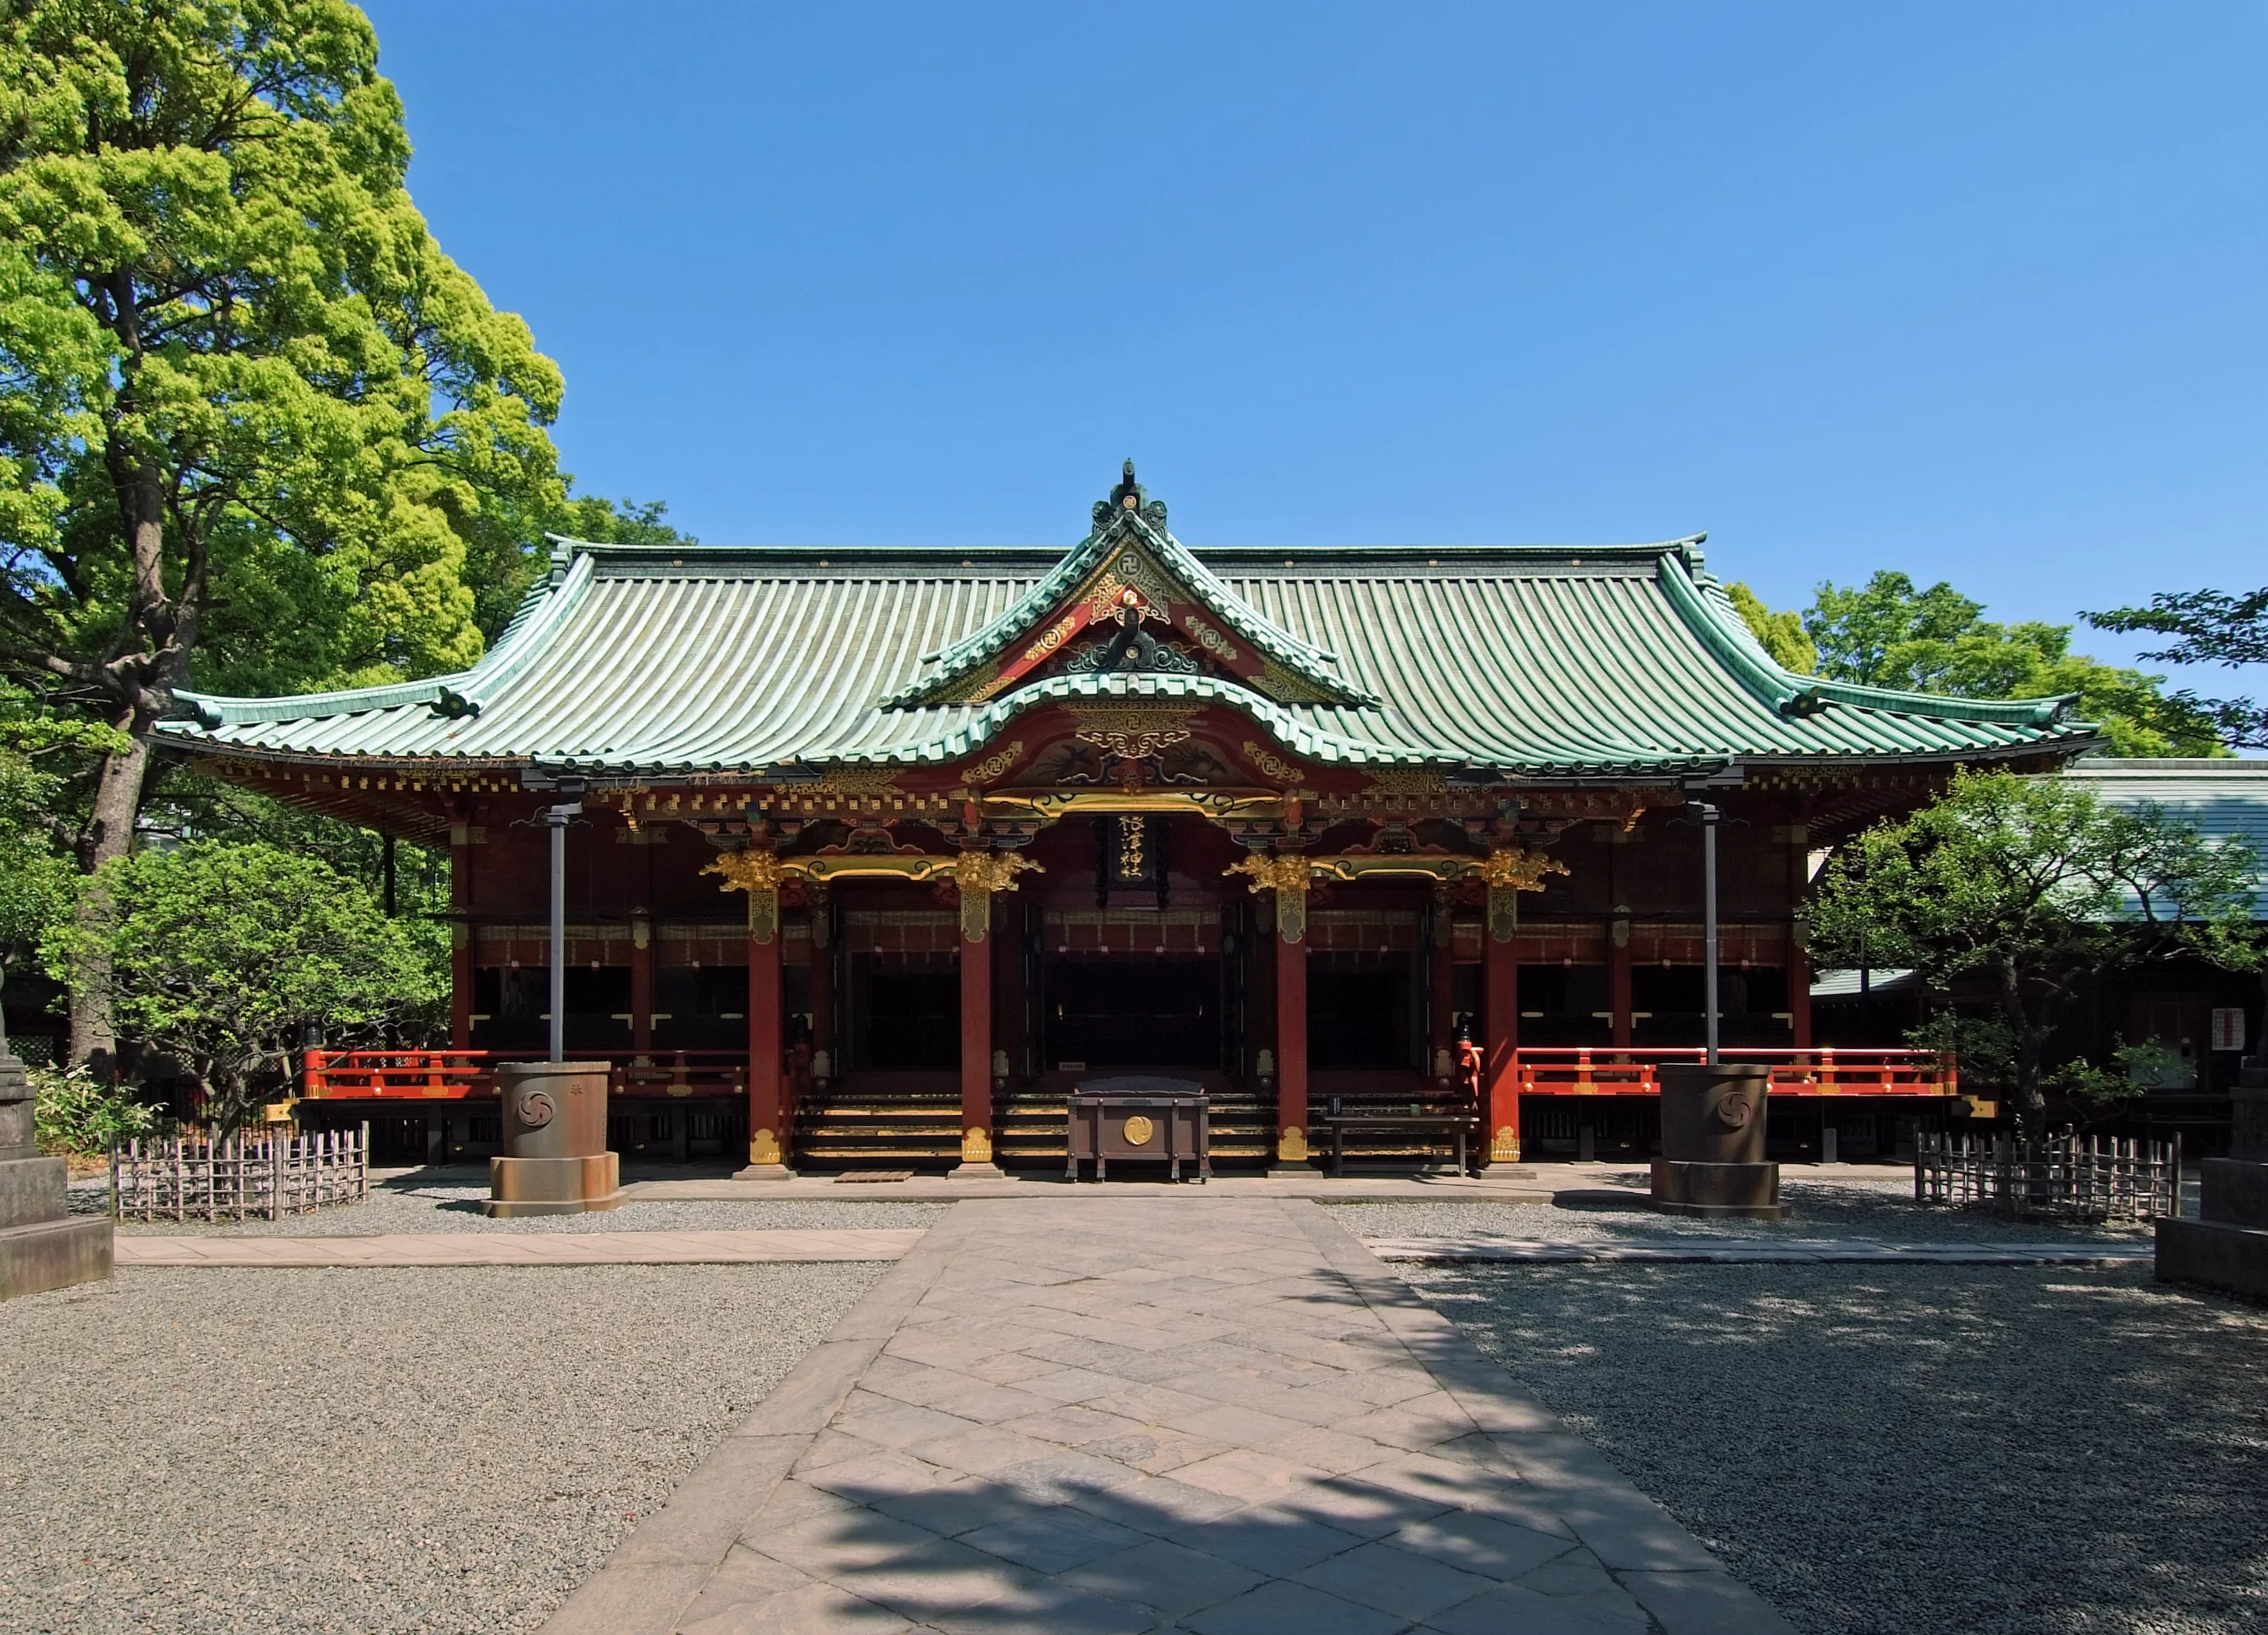 Nezu Shrine in Japan, East Asia | Architecture - Rated 3.5